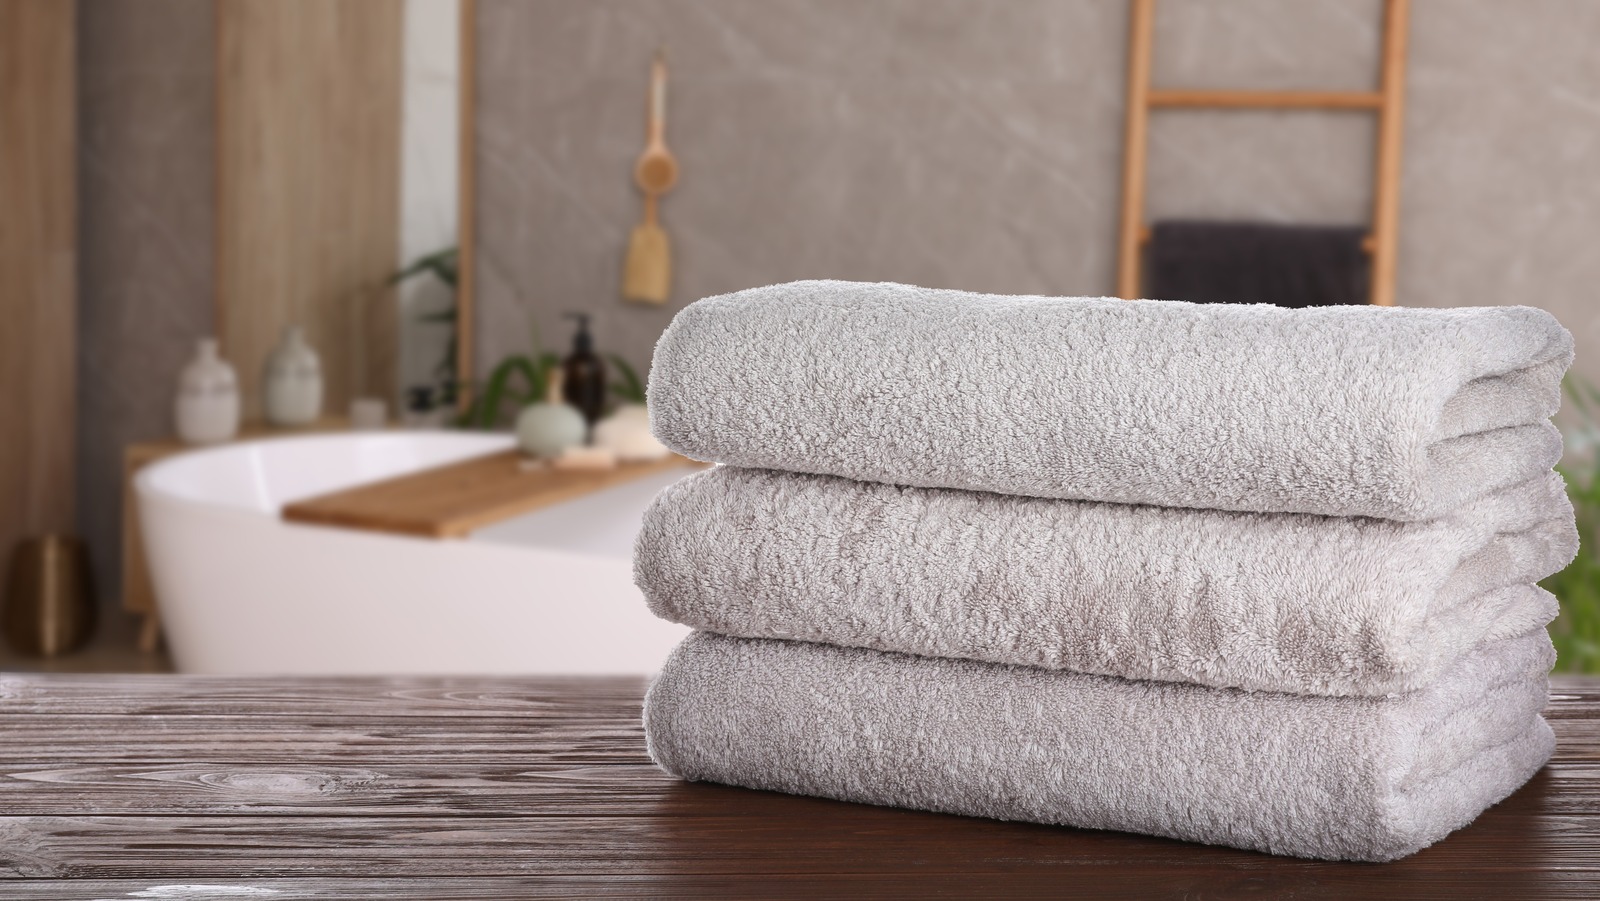 https://www.housedigest.com/img/gallery/are-the-towels-at-macys-worth-buying/l-intro-1674836013.jpg